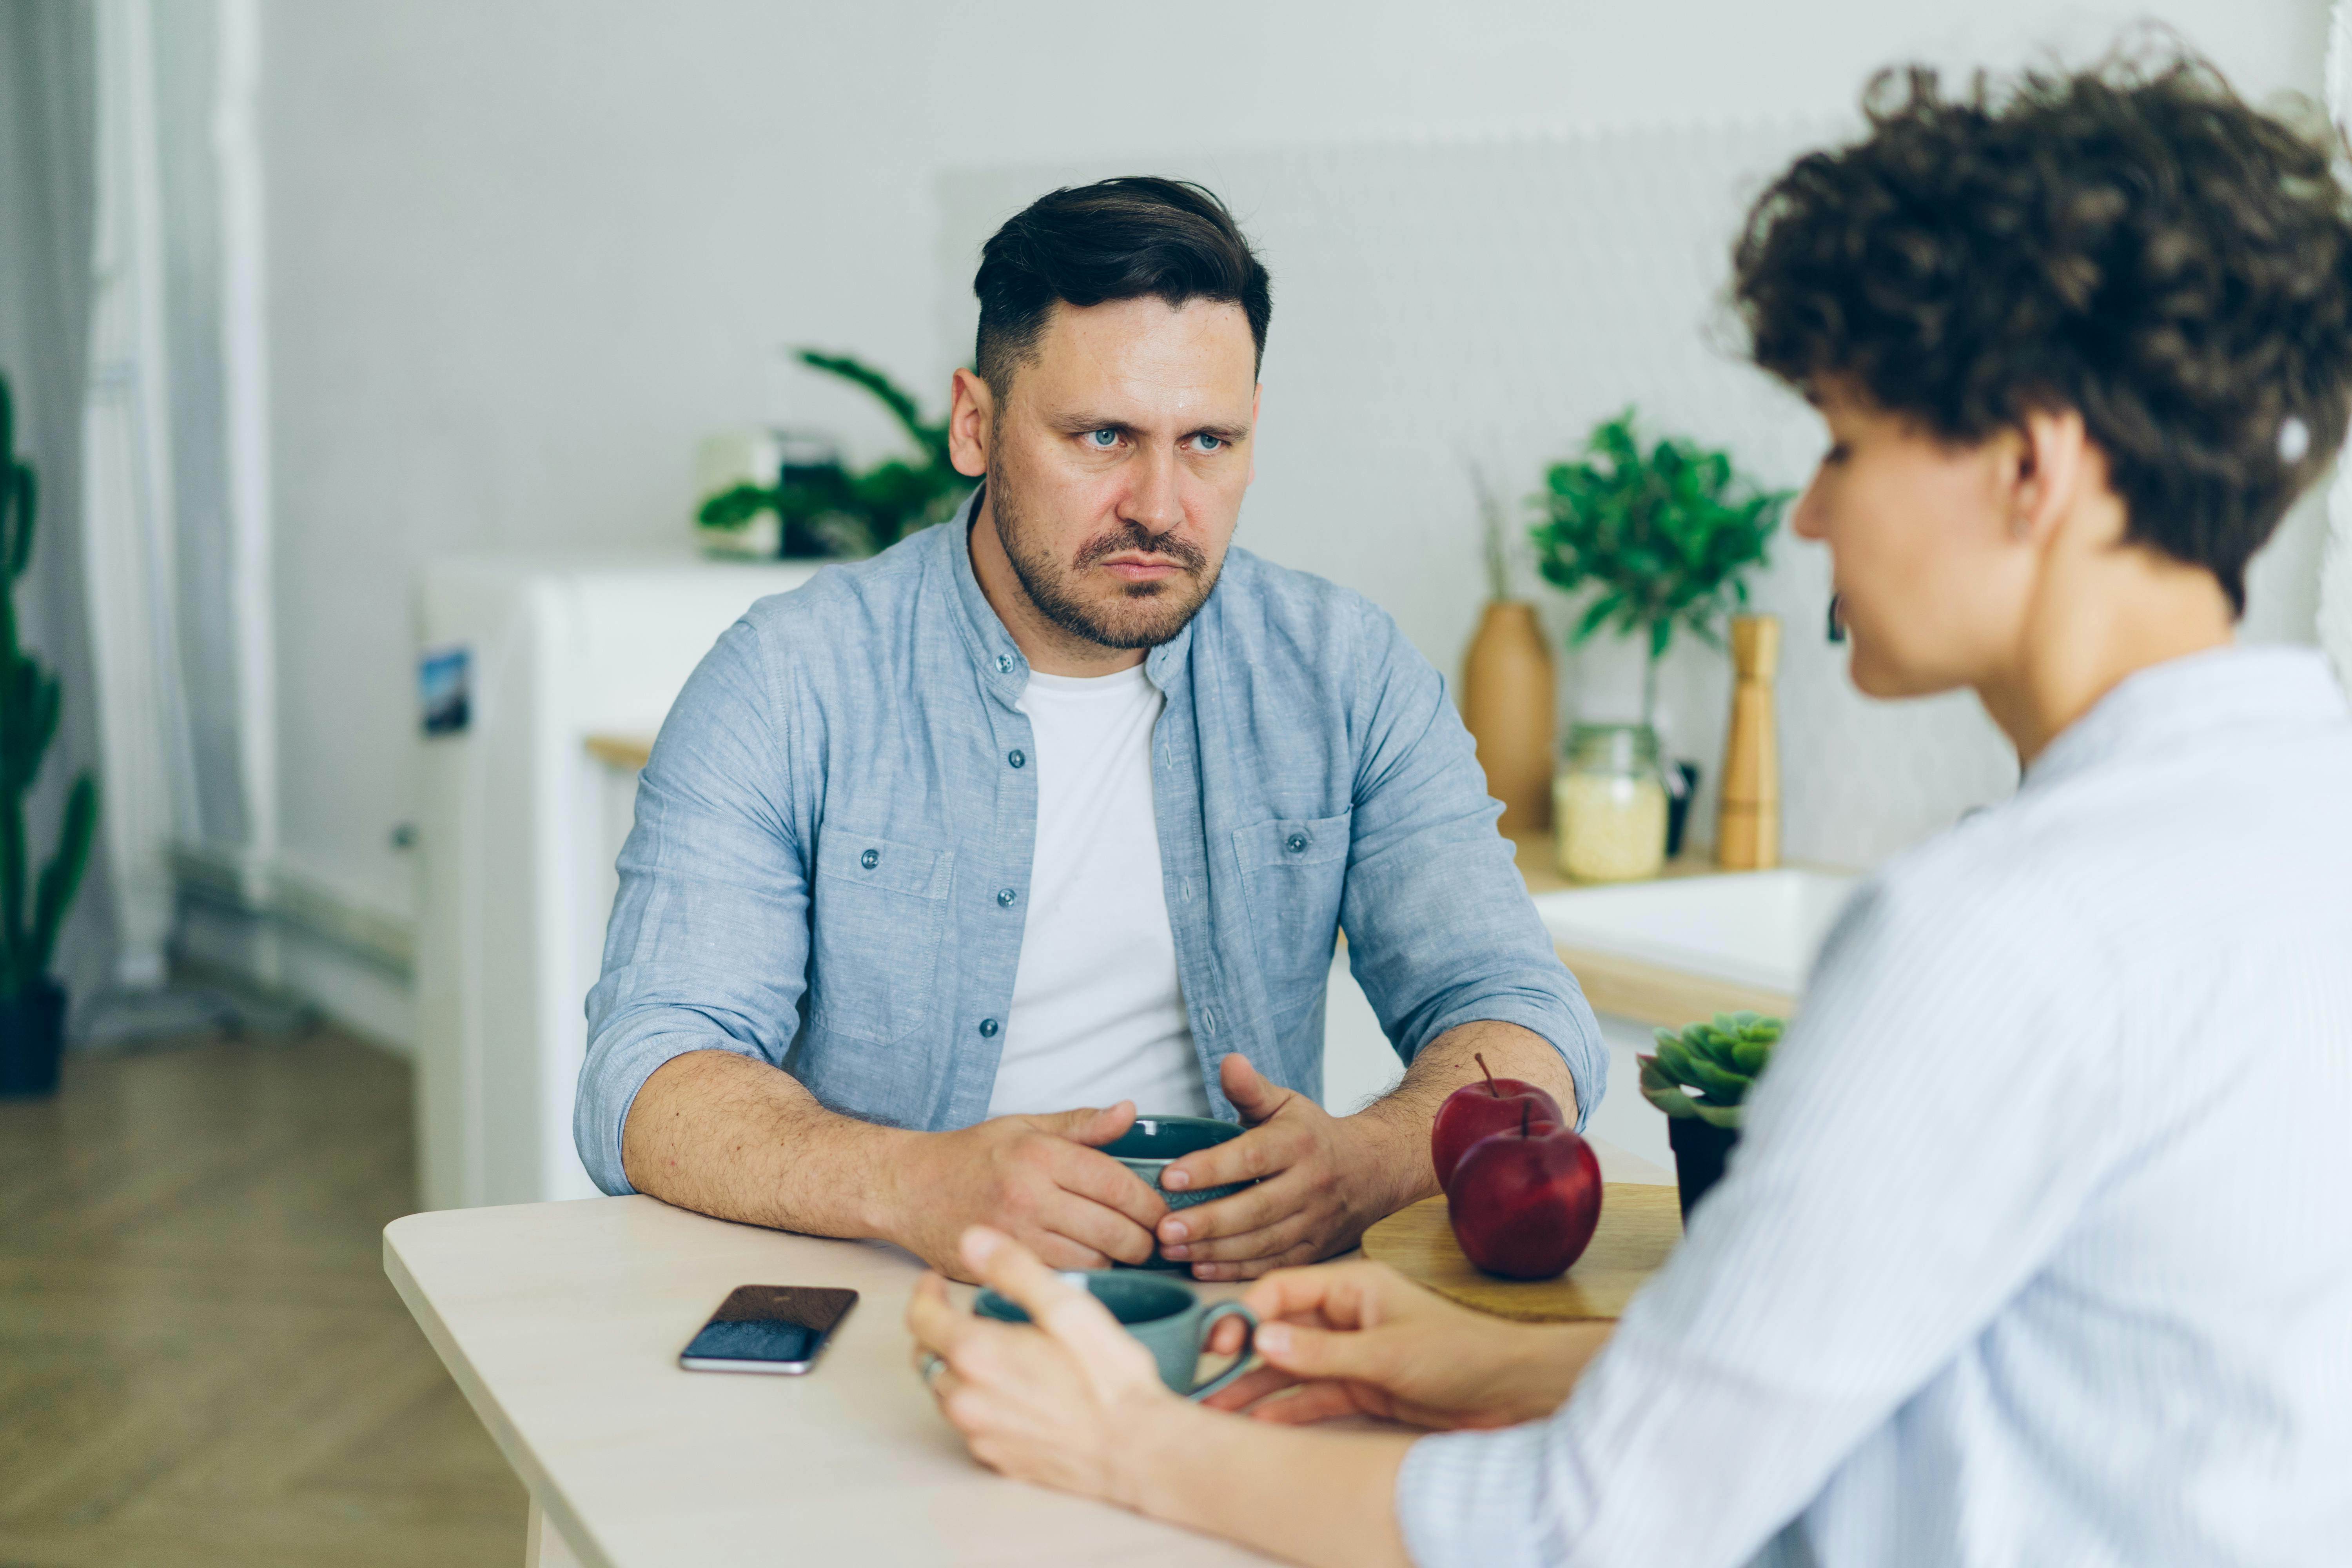 An angry man sitting by the table while looking at a woman | Source: Pexels